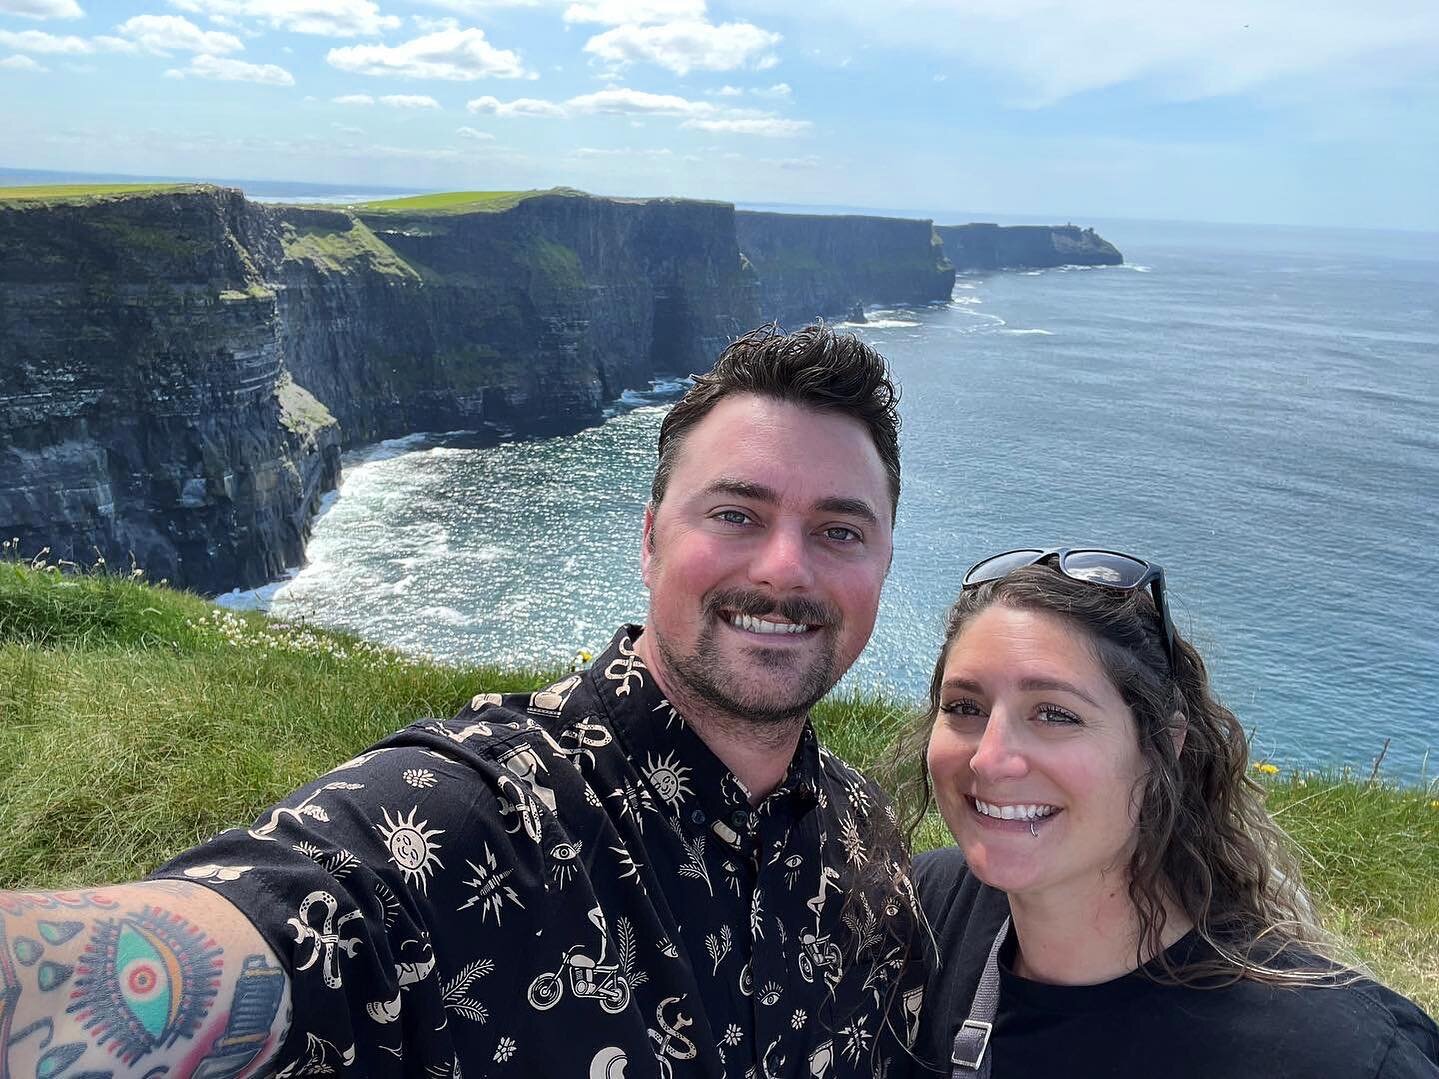 Take Me Back to the #cliffsofmoher 🇮🇪✨🤩🍀☀️

I&rsquo;m still over here daydreaming about our magical 💫2 week trip in Ireland 🇮🇪 &amp; Northern Ireland 🇬🇧

☘️Fun Fact: they are indeed, different countries &amp; even use different currency 💶 ?